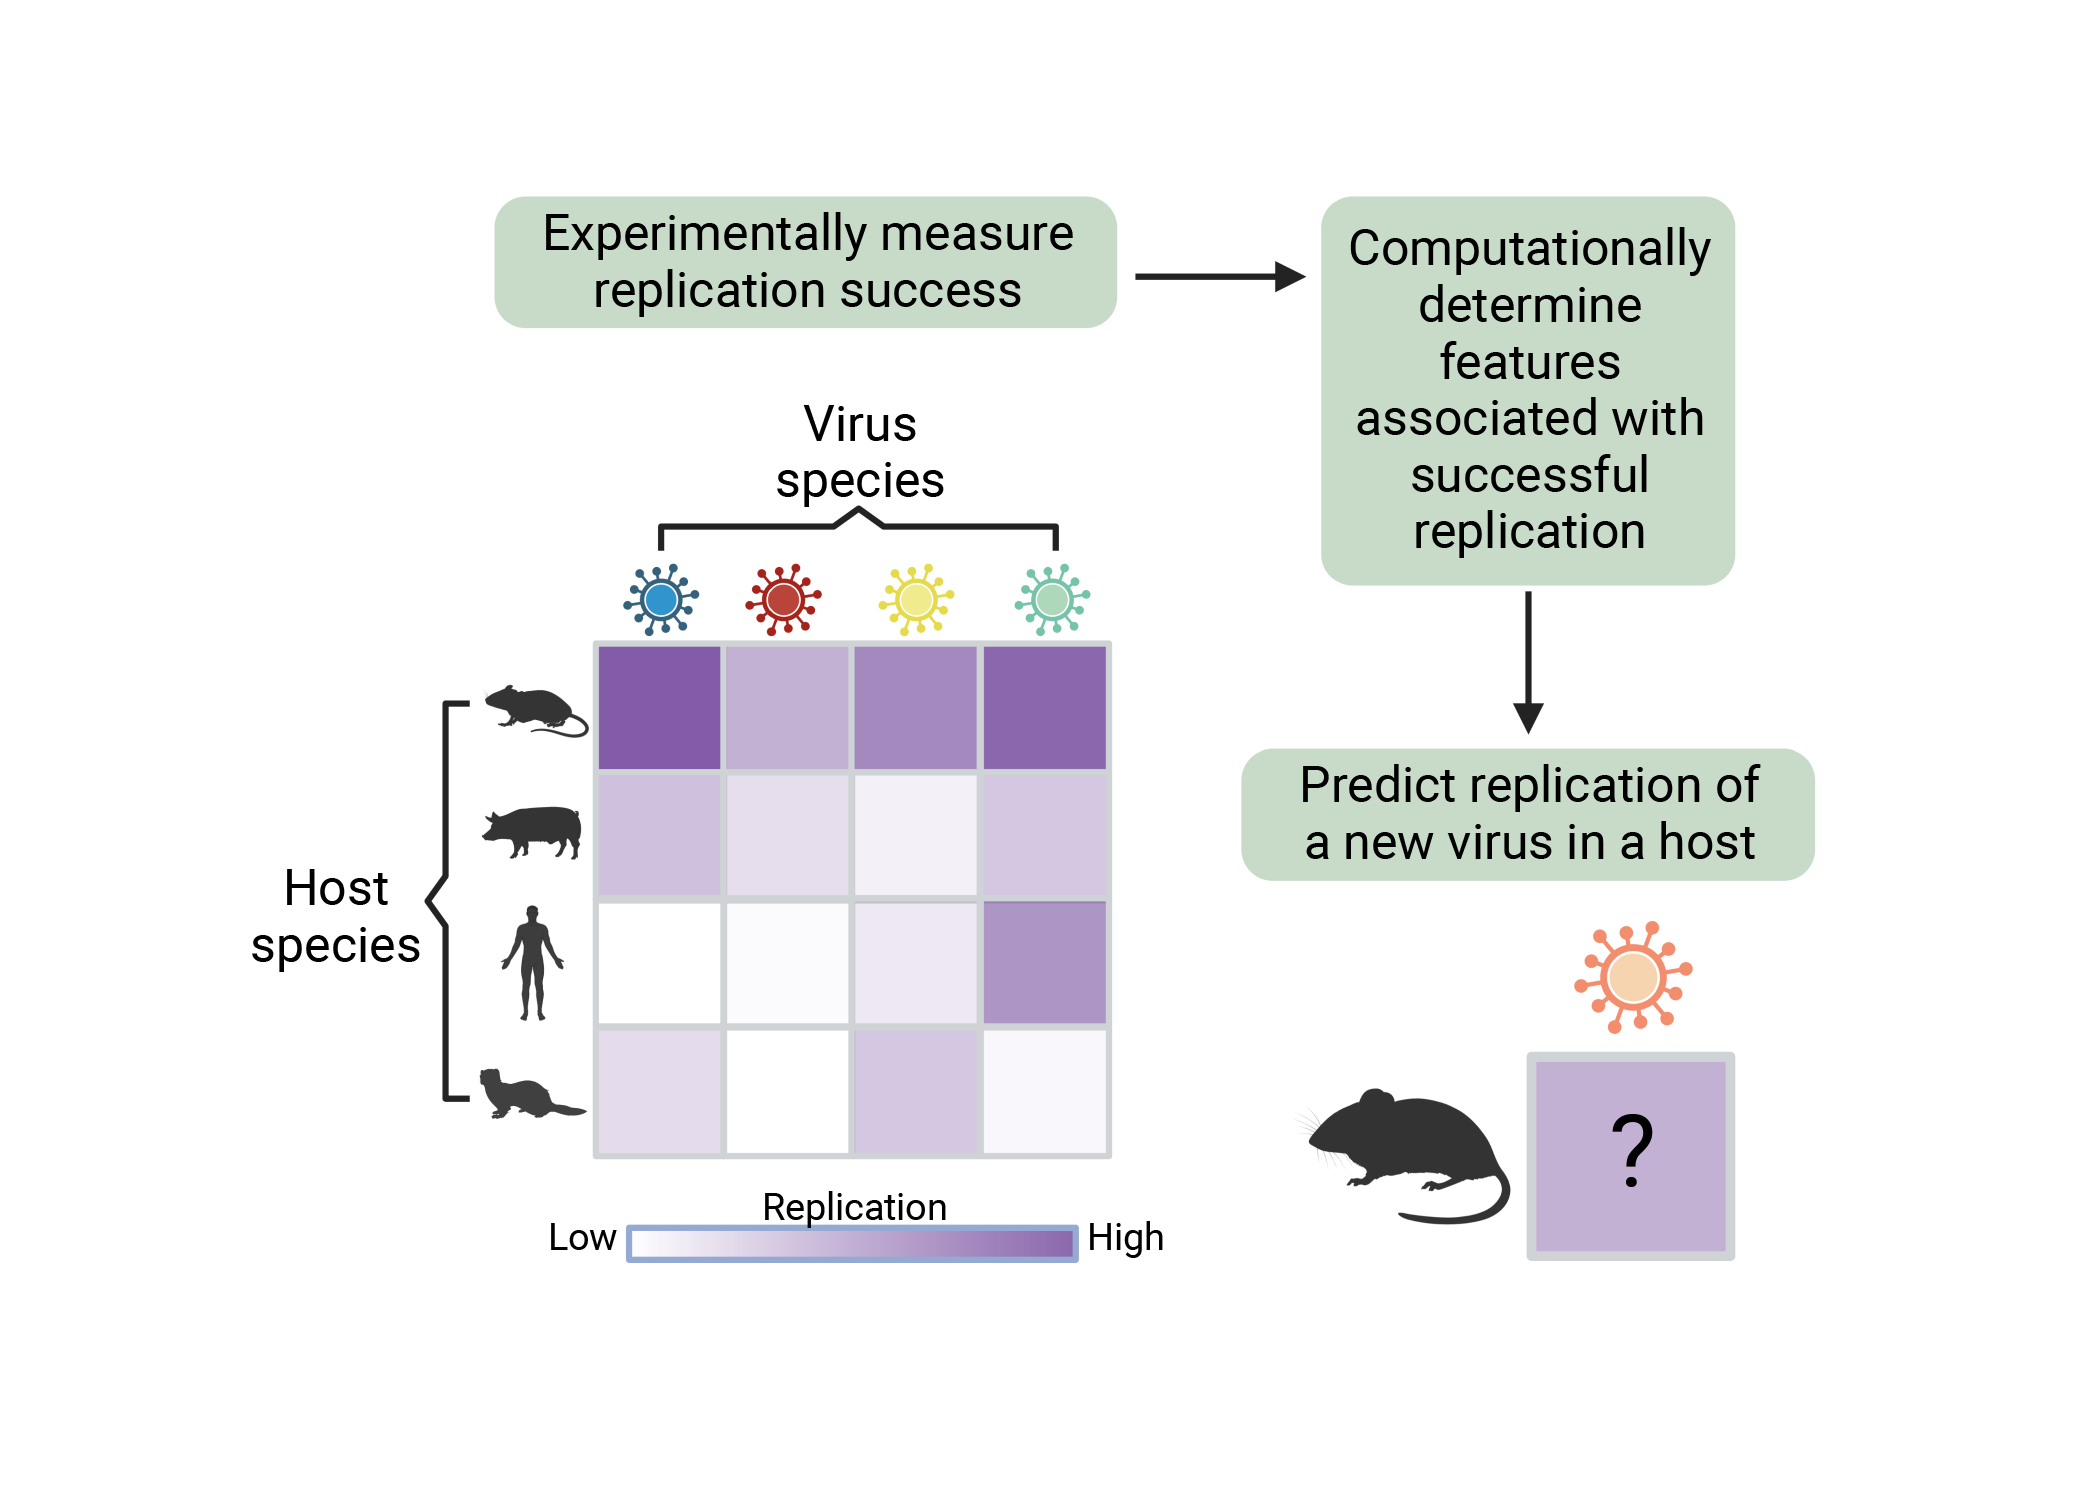 graphic showing project: Step 1, experimentally measure replication success; Step 2, computationally determine features associated with successful replication; Step 3, predict replication of a new virus in a host